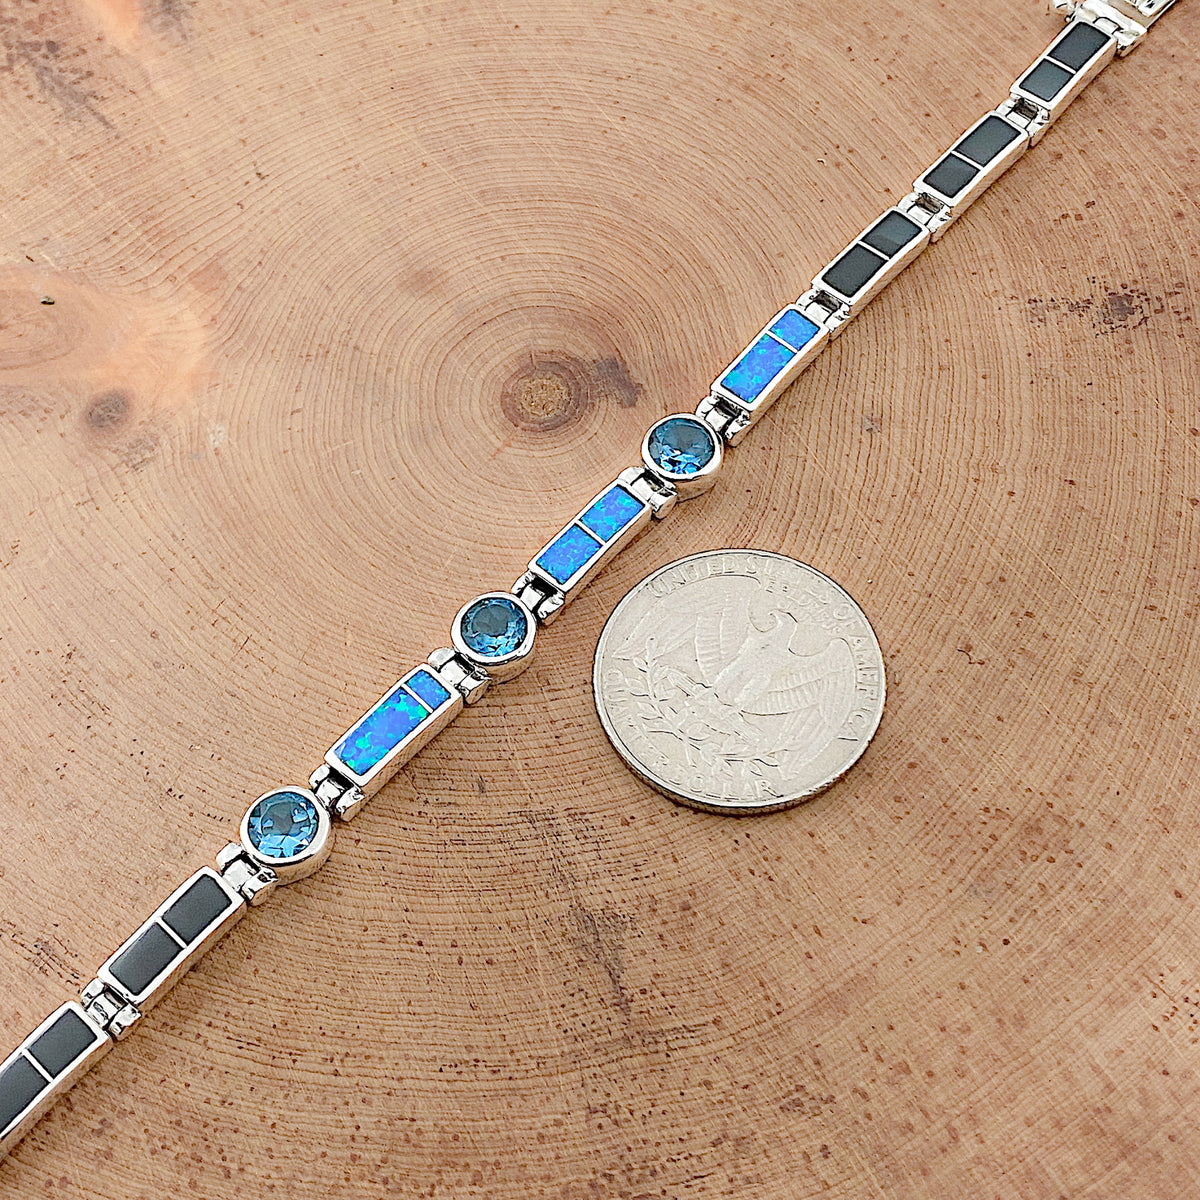 A comparison shot of a US quarter coin and a sterling silver bracelet that is inlaid with Black Jade, Blue Cultured Opal, and is set with three London Blue Topaz stones that is laid flat